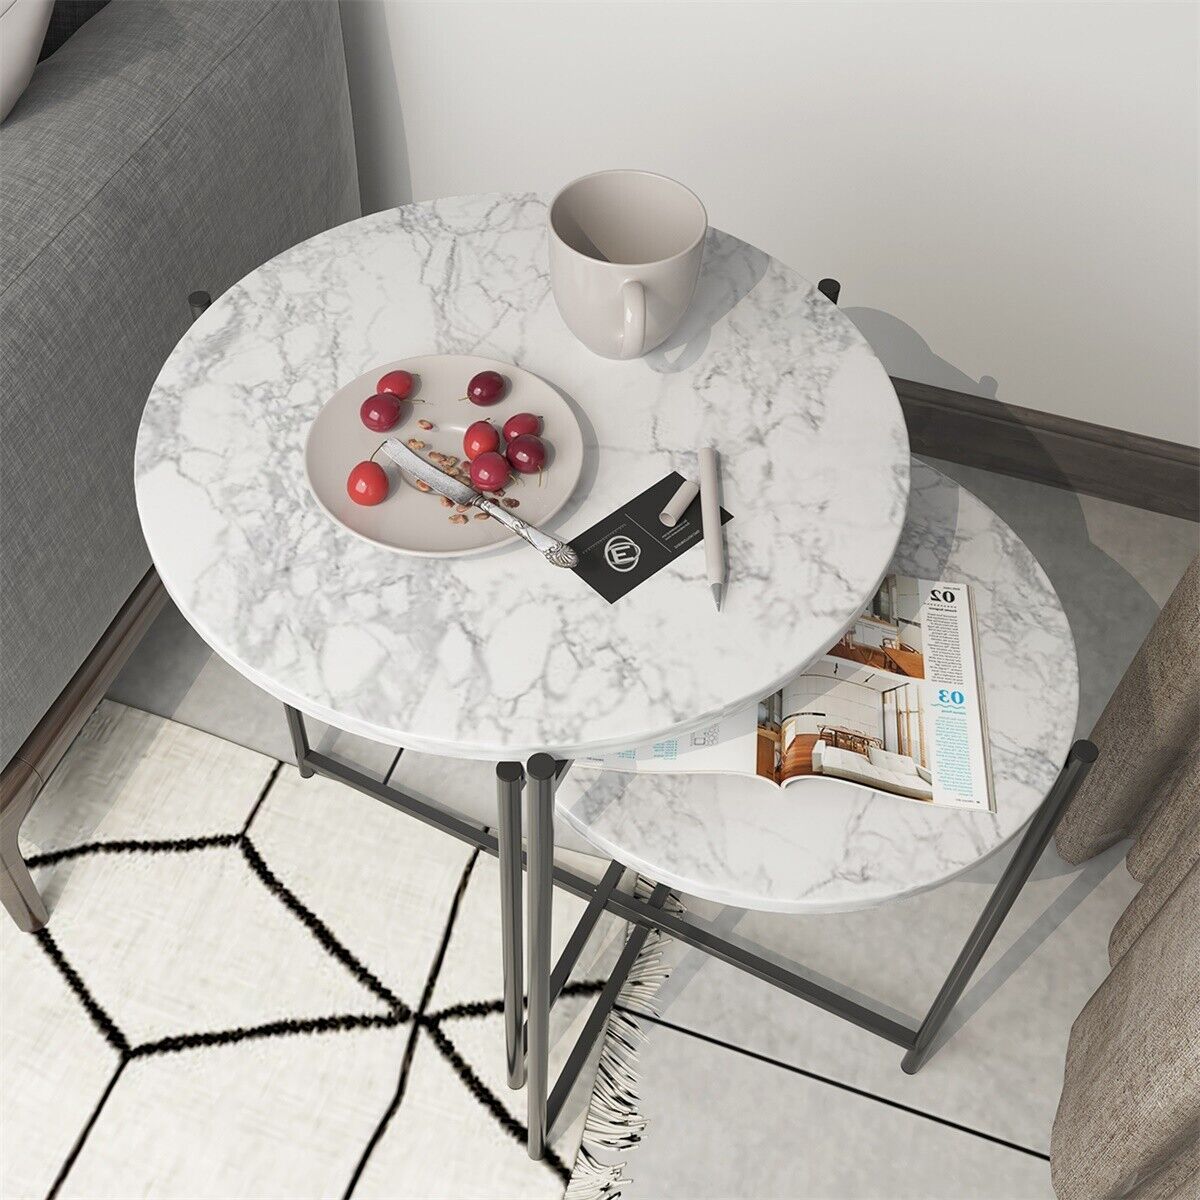 Hommoo Modern Faux Marble Top Round Nesting Coffee Table, 2 Piece, White  Tables – The Ict University Intended For Modern Round Faux Marble Coffee Tables (View 7 of 15)